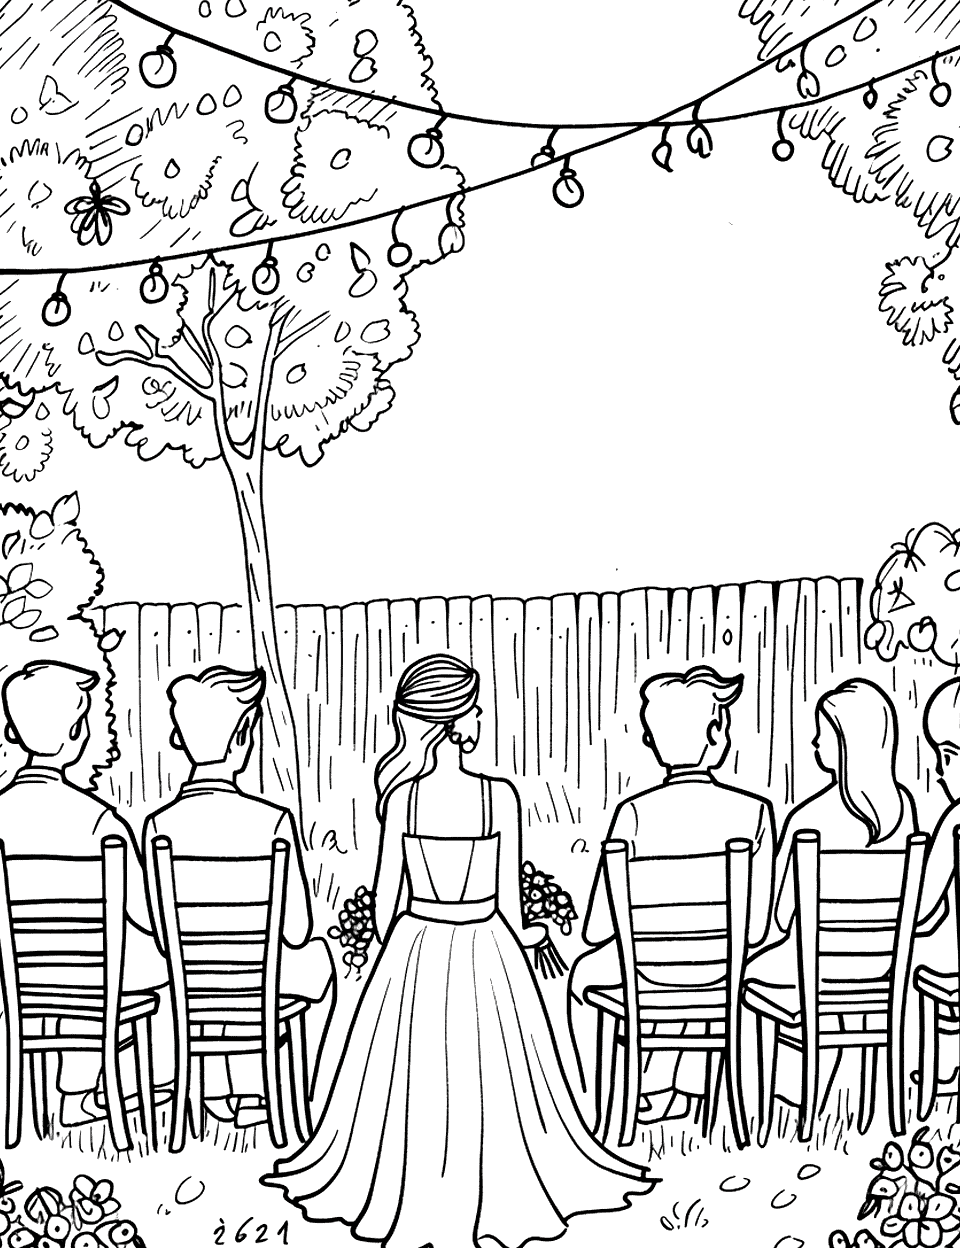 Simple Backyard Wedding Coloring Page - A casual wedding with guests seated in a simple, decorated backyard.